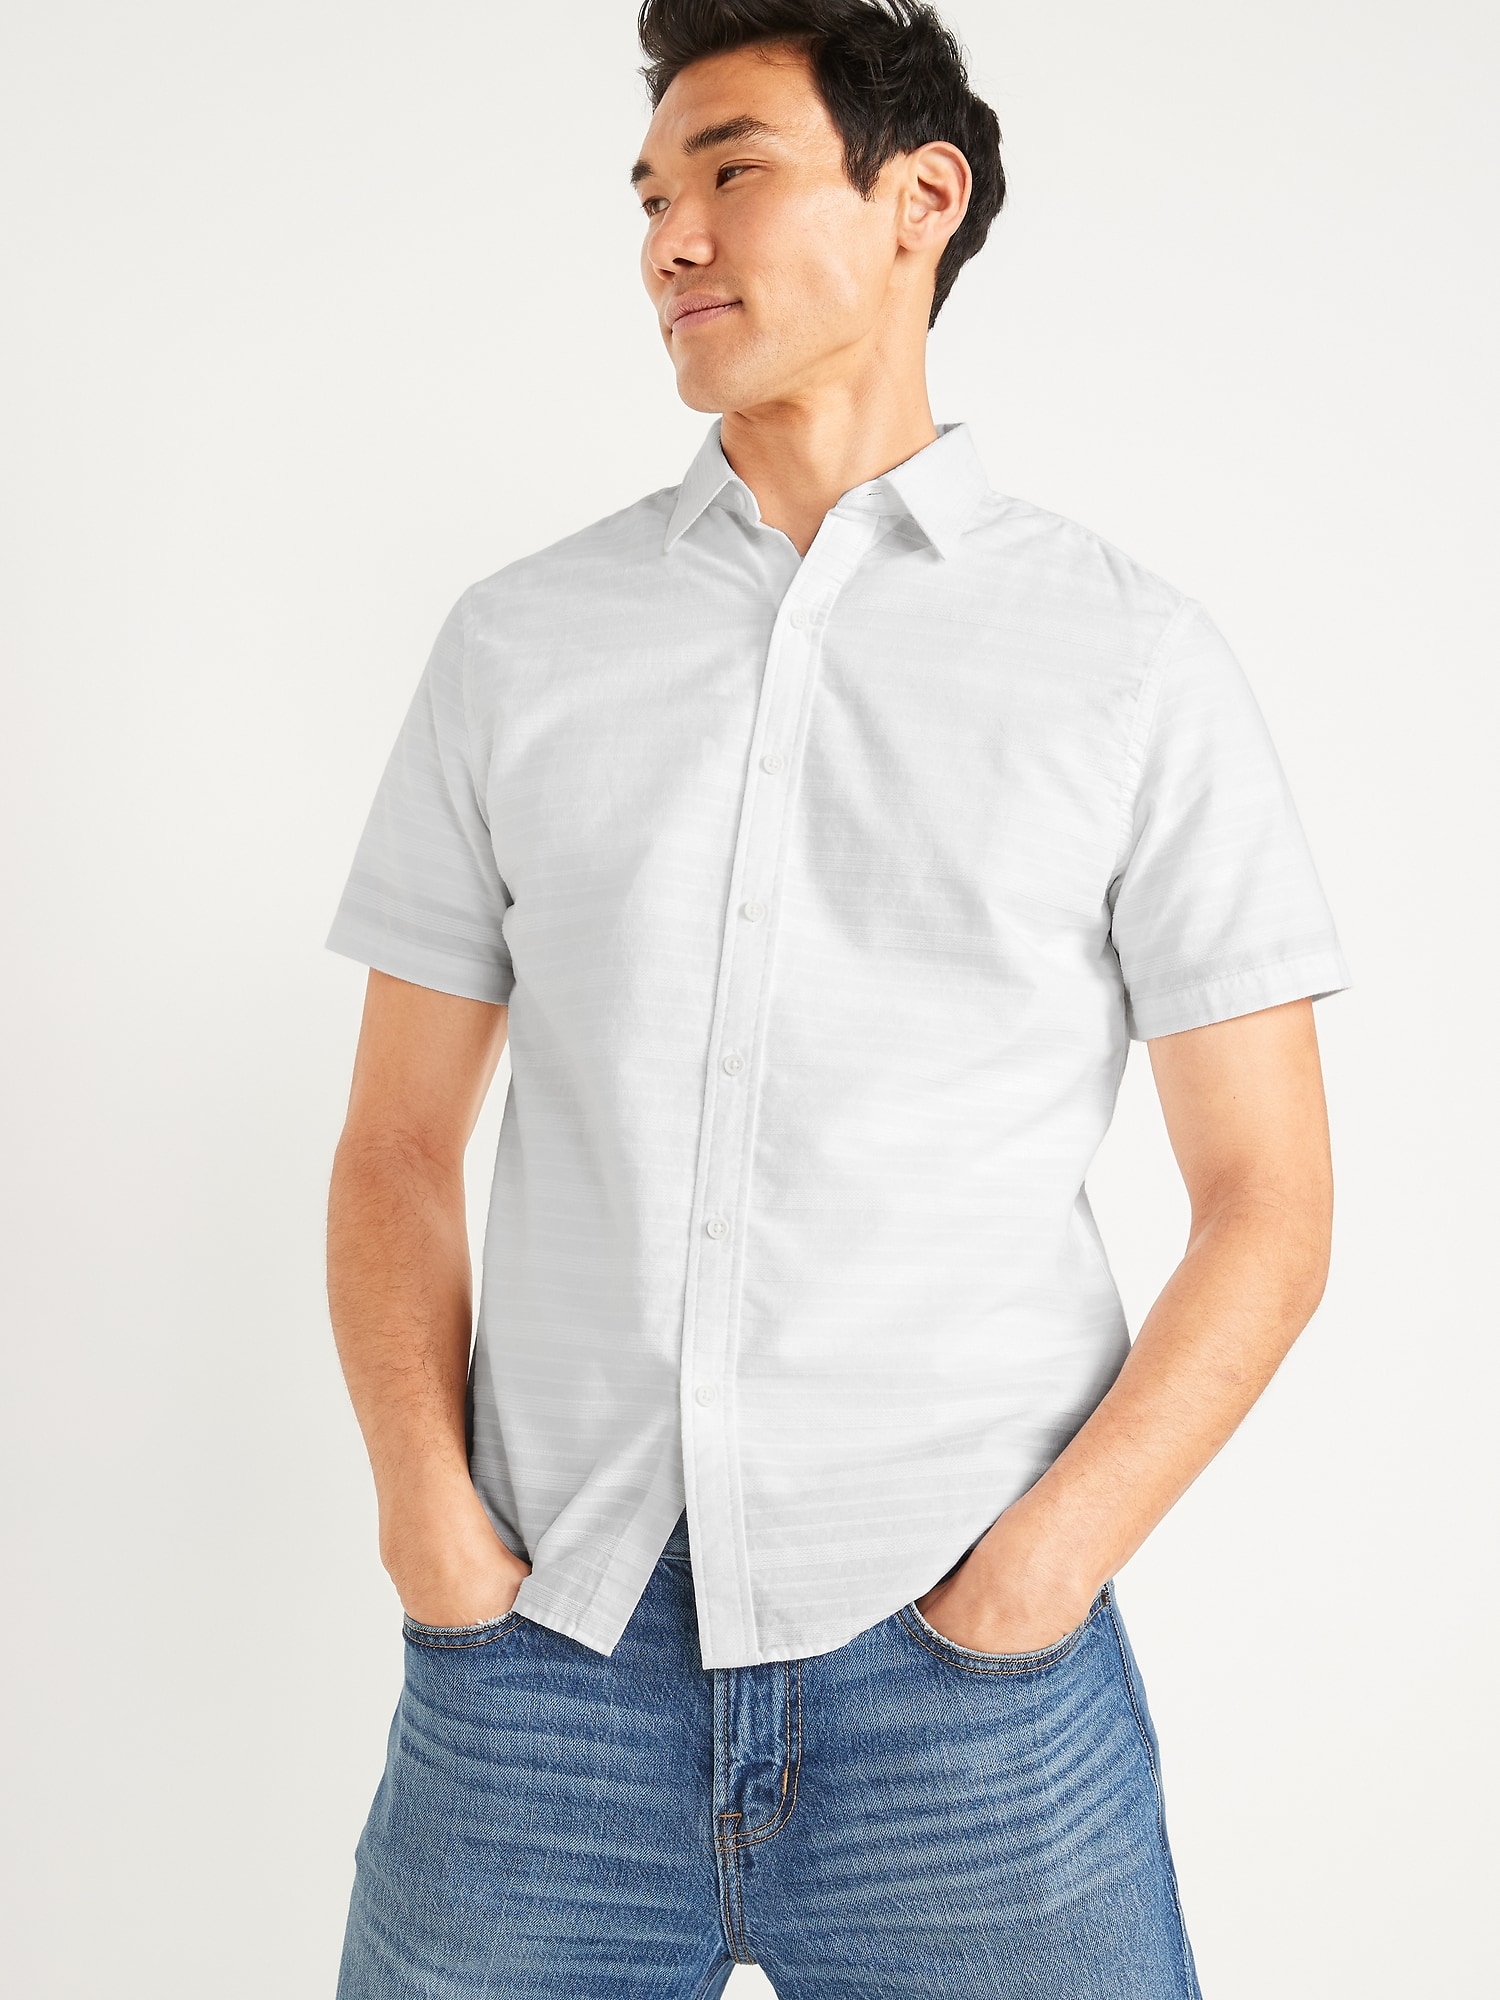 Old Navy Classic Fit Textured Dobby Everyday Shirt white. 1